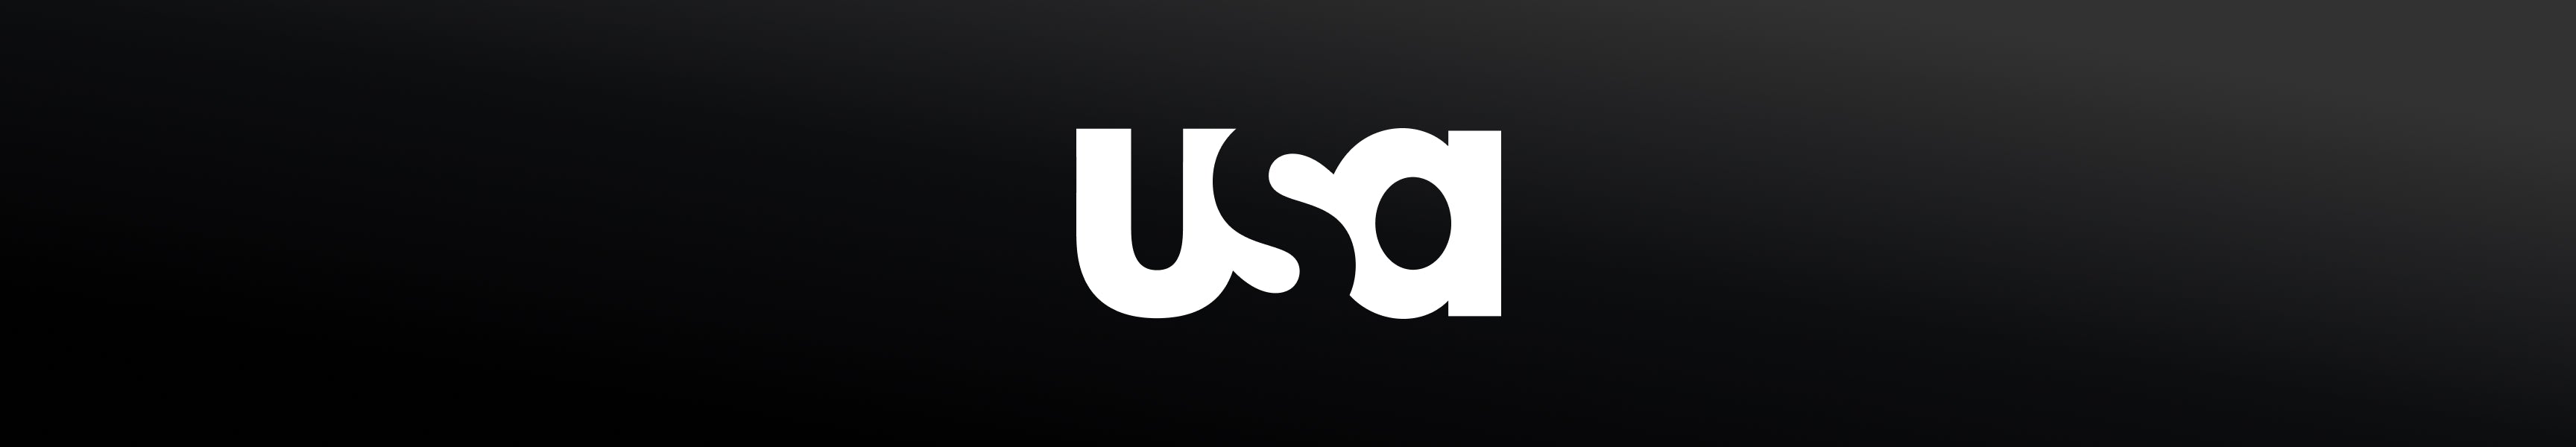 USA Network Home & Office